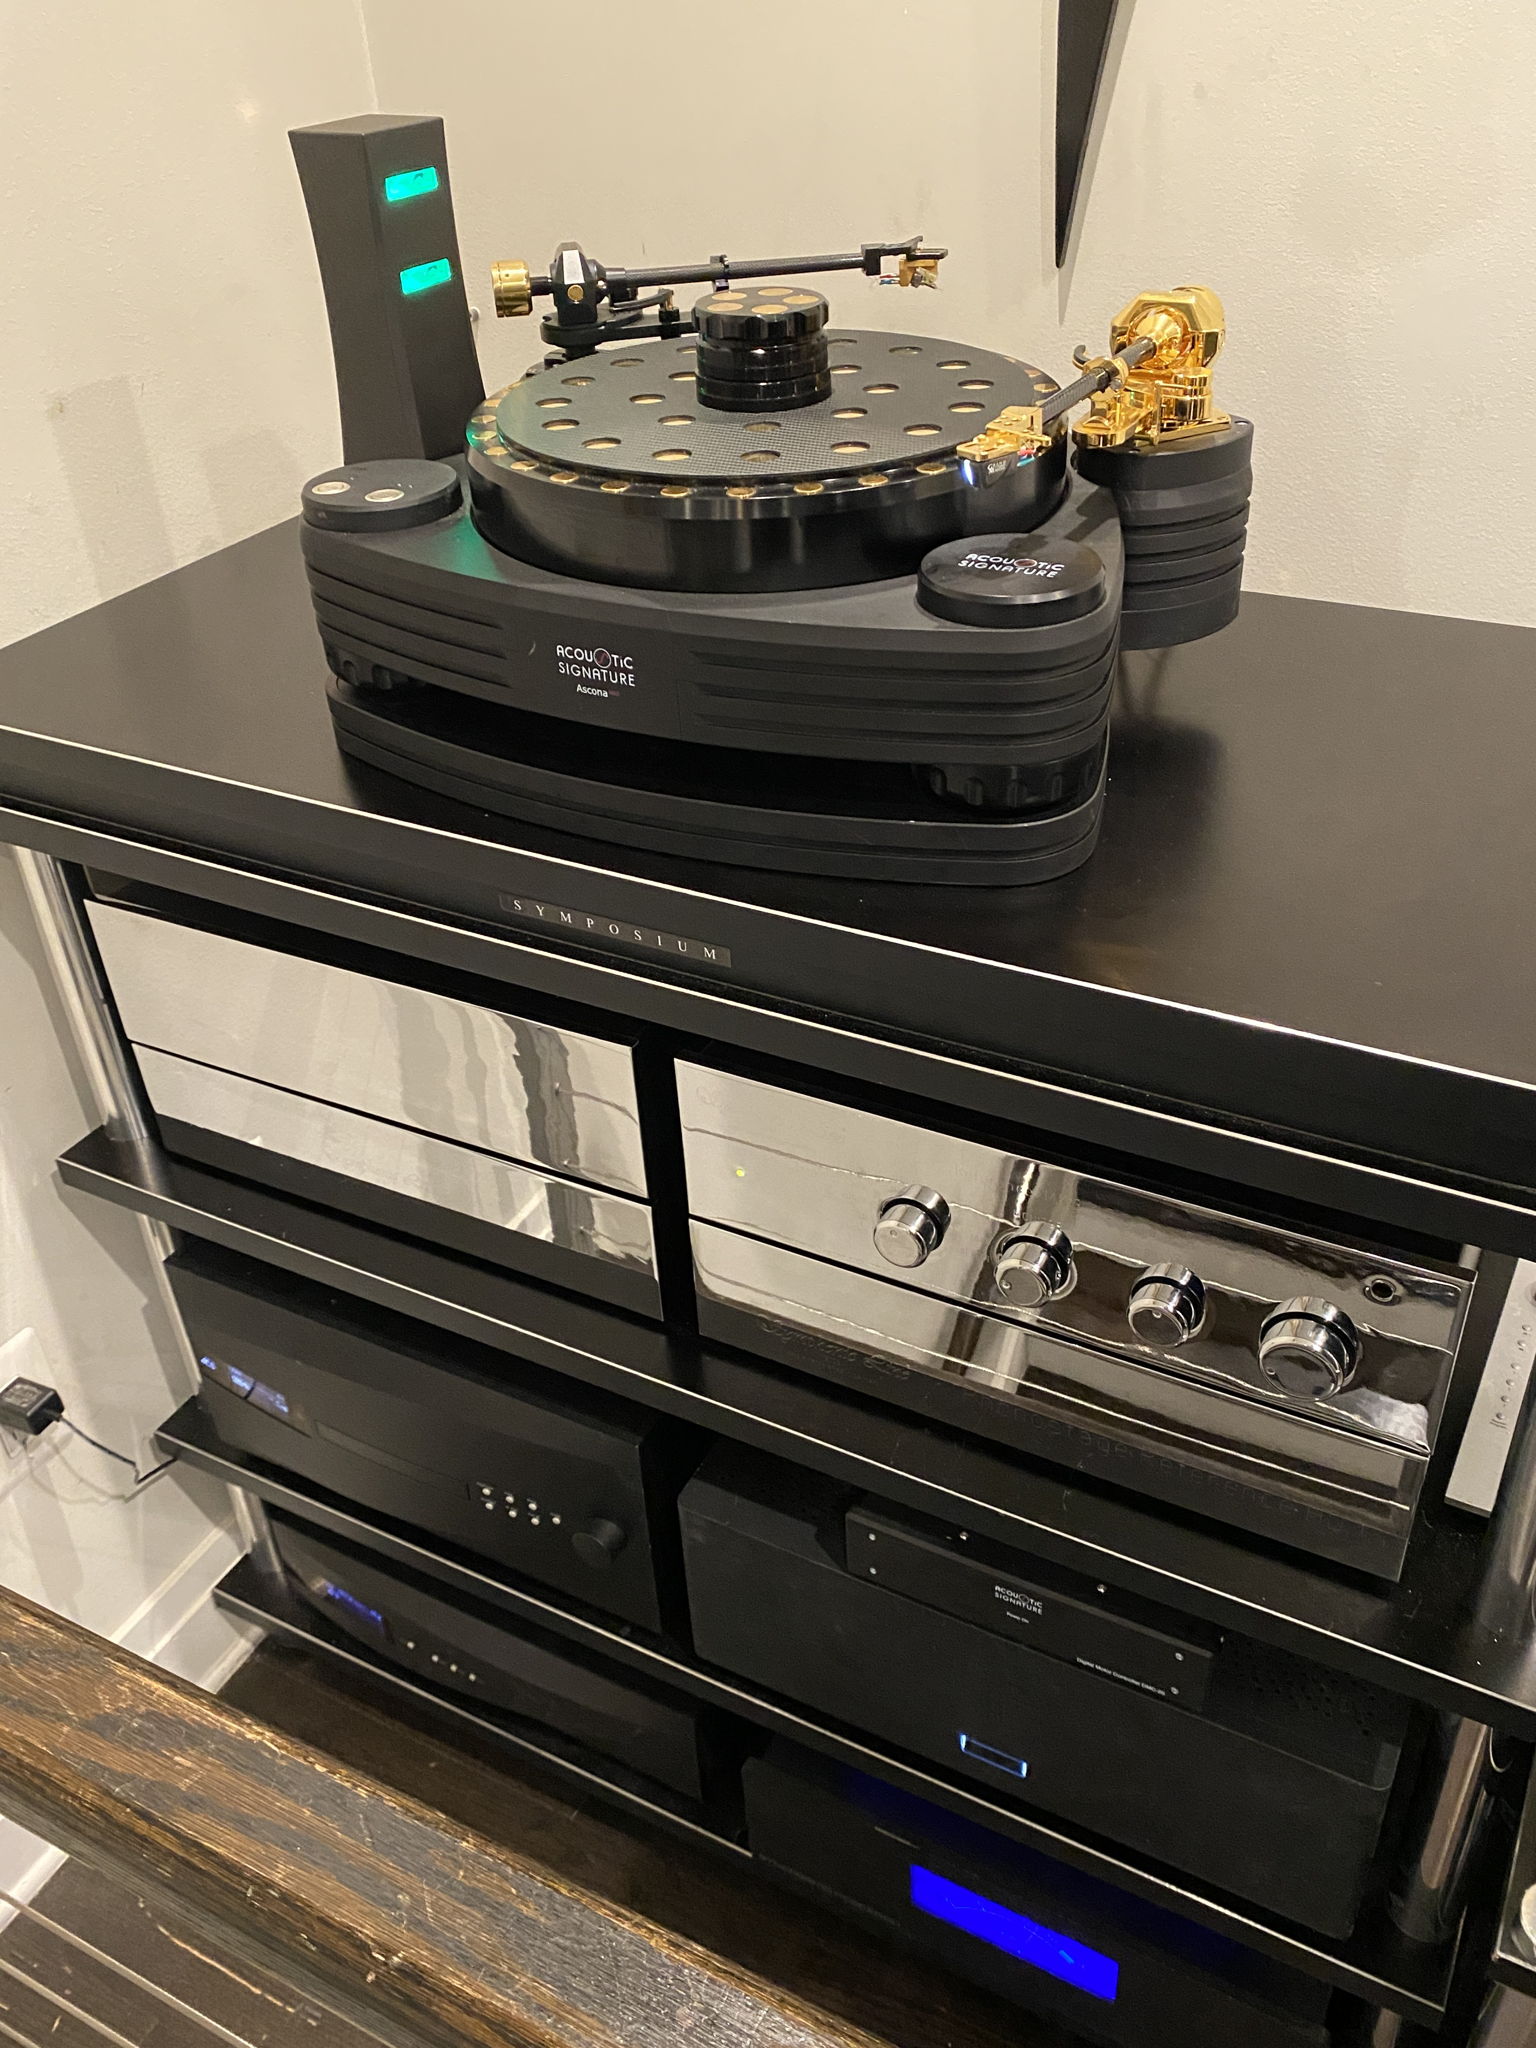 Acoustic Signature Ascona Neo Turntable/Tonearms; Symphonic Line Erleuchtung Mk3D Reference Tube Preamplifier w/ Turbo Ref. Power Supply; Symphonic Line Ref. Phono HD Preamplifier w/Turbo Ref. Power Supply; dCS Vivaldi One DAC/SACD/CD/Digital Player; Taiko Extreme Server; dCS Vivaldi Reference Clock; Synergistic Research Powercell SX Power Conditioner